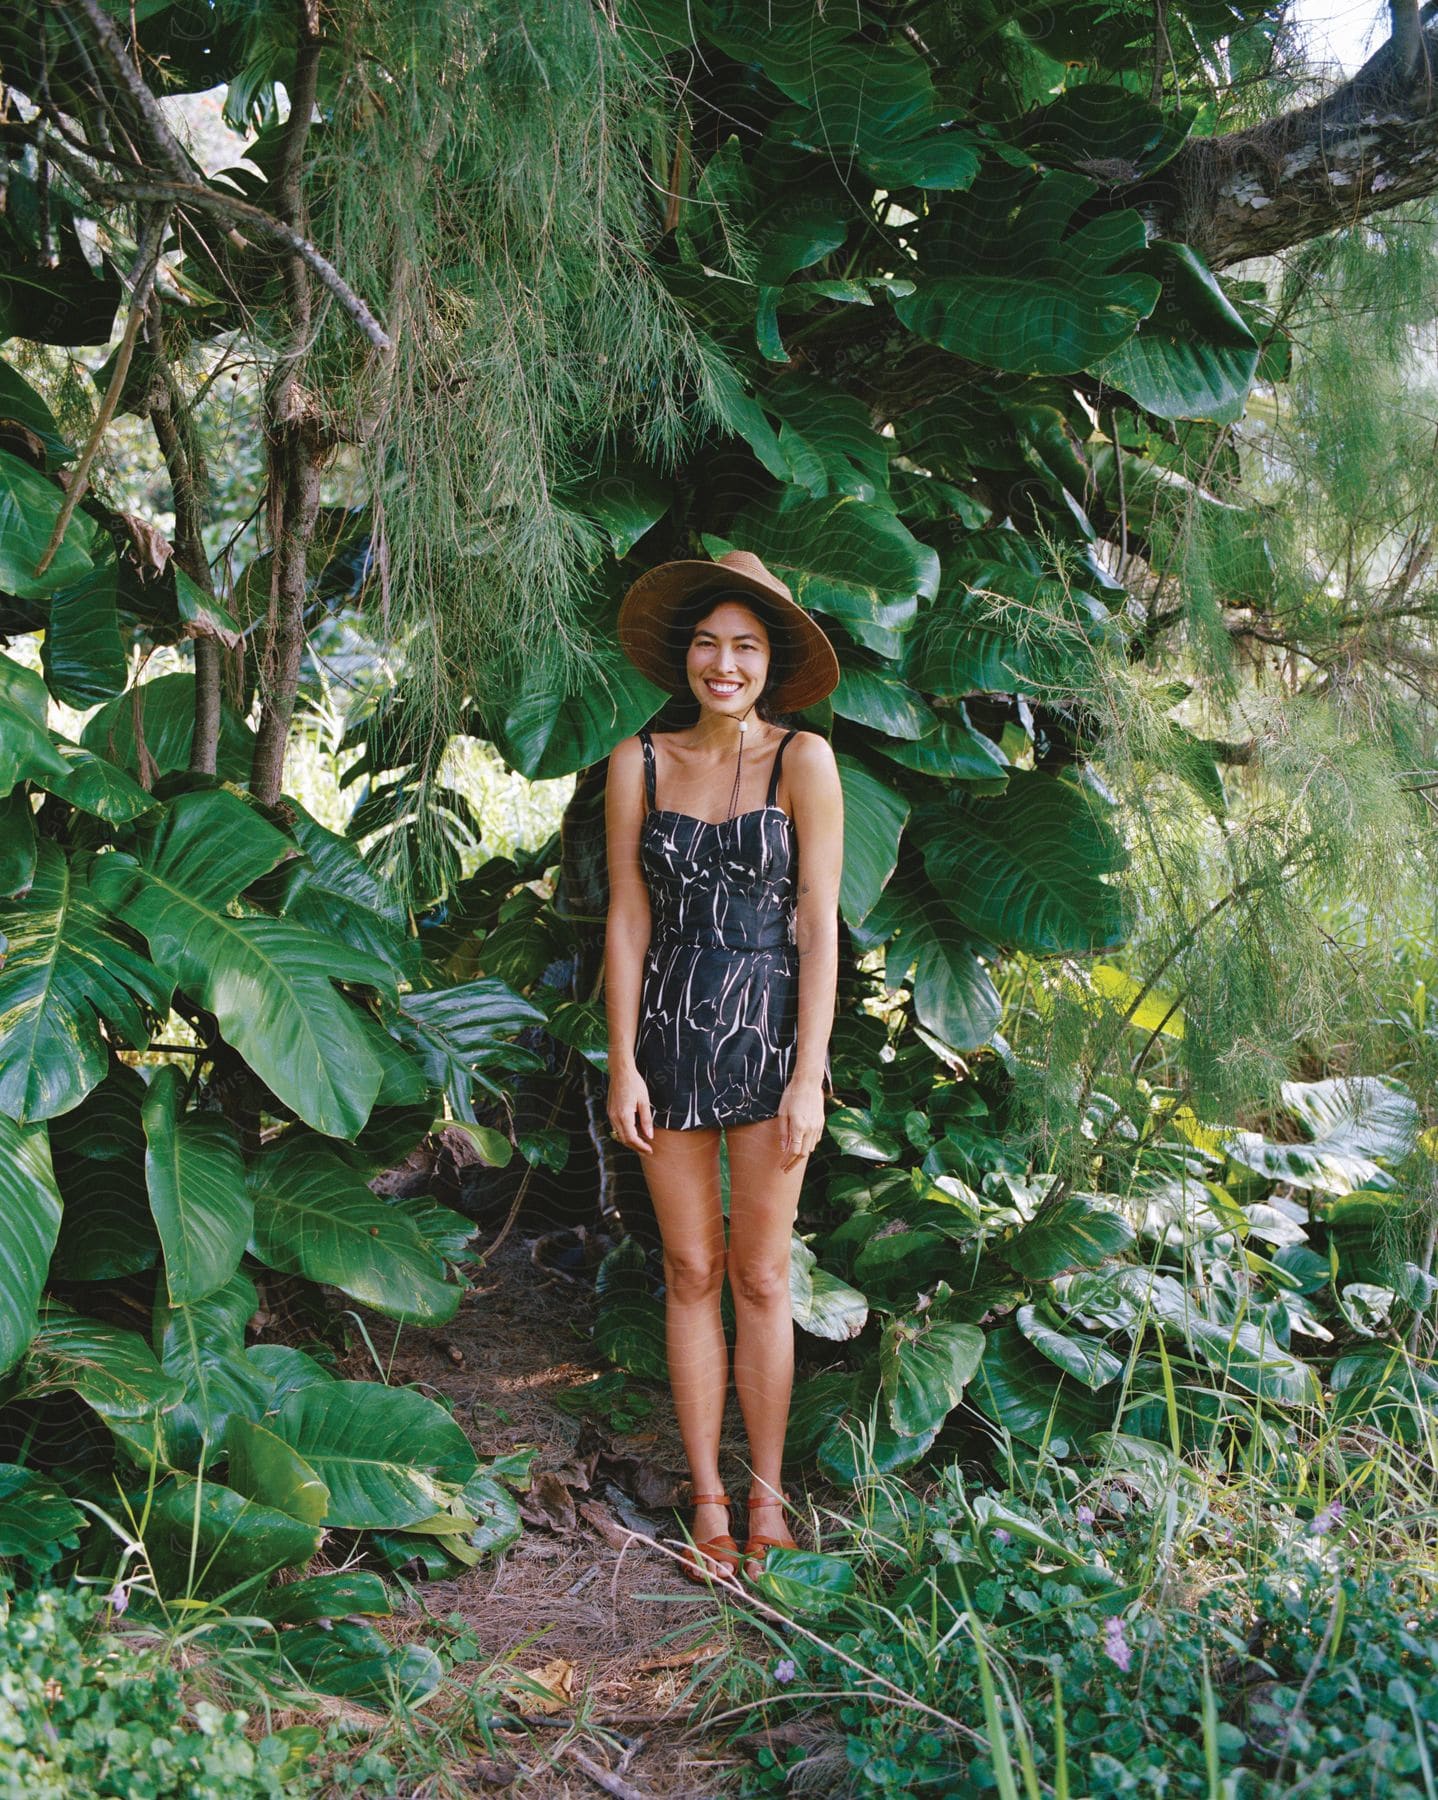 A woman standing in front of a large leafy plant wearing a romper